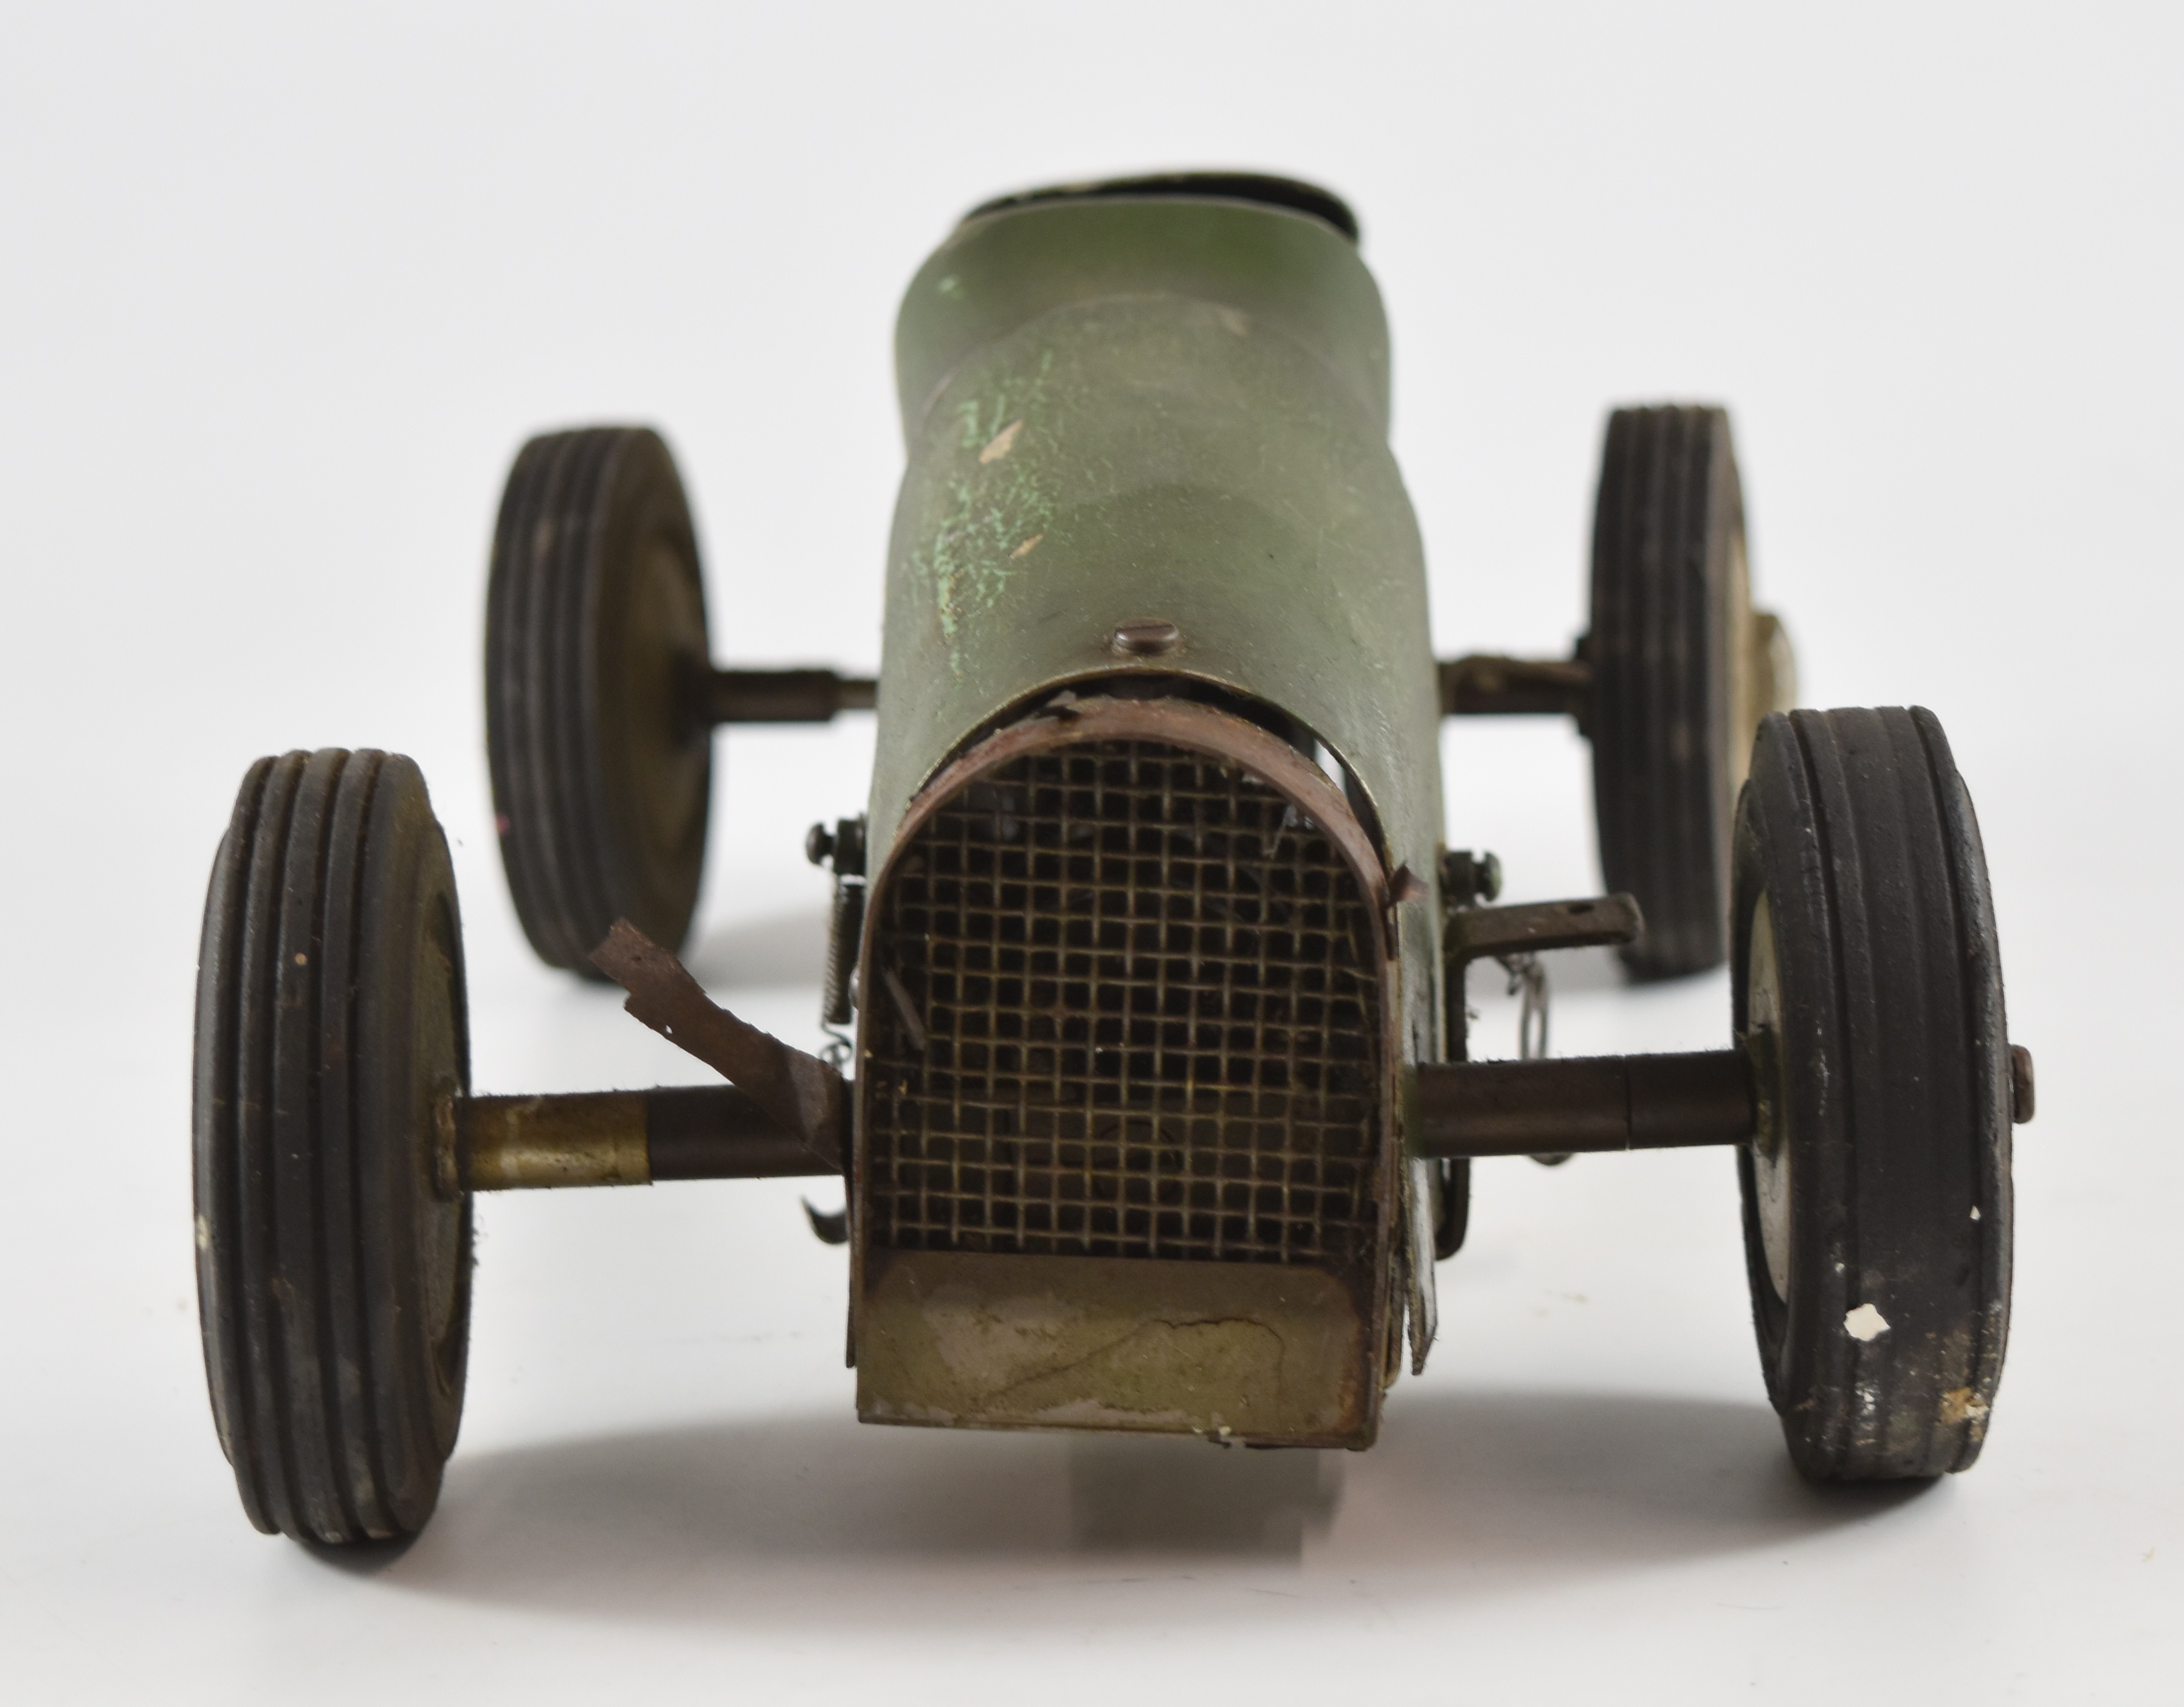 Vintage diesel engine powered model pylon racing car in the style of a 1930s single seat racing car, - Image 5 of 7